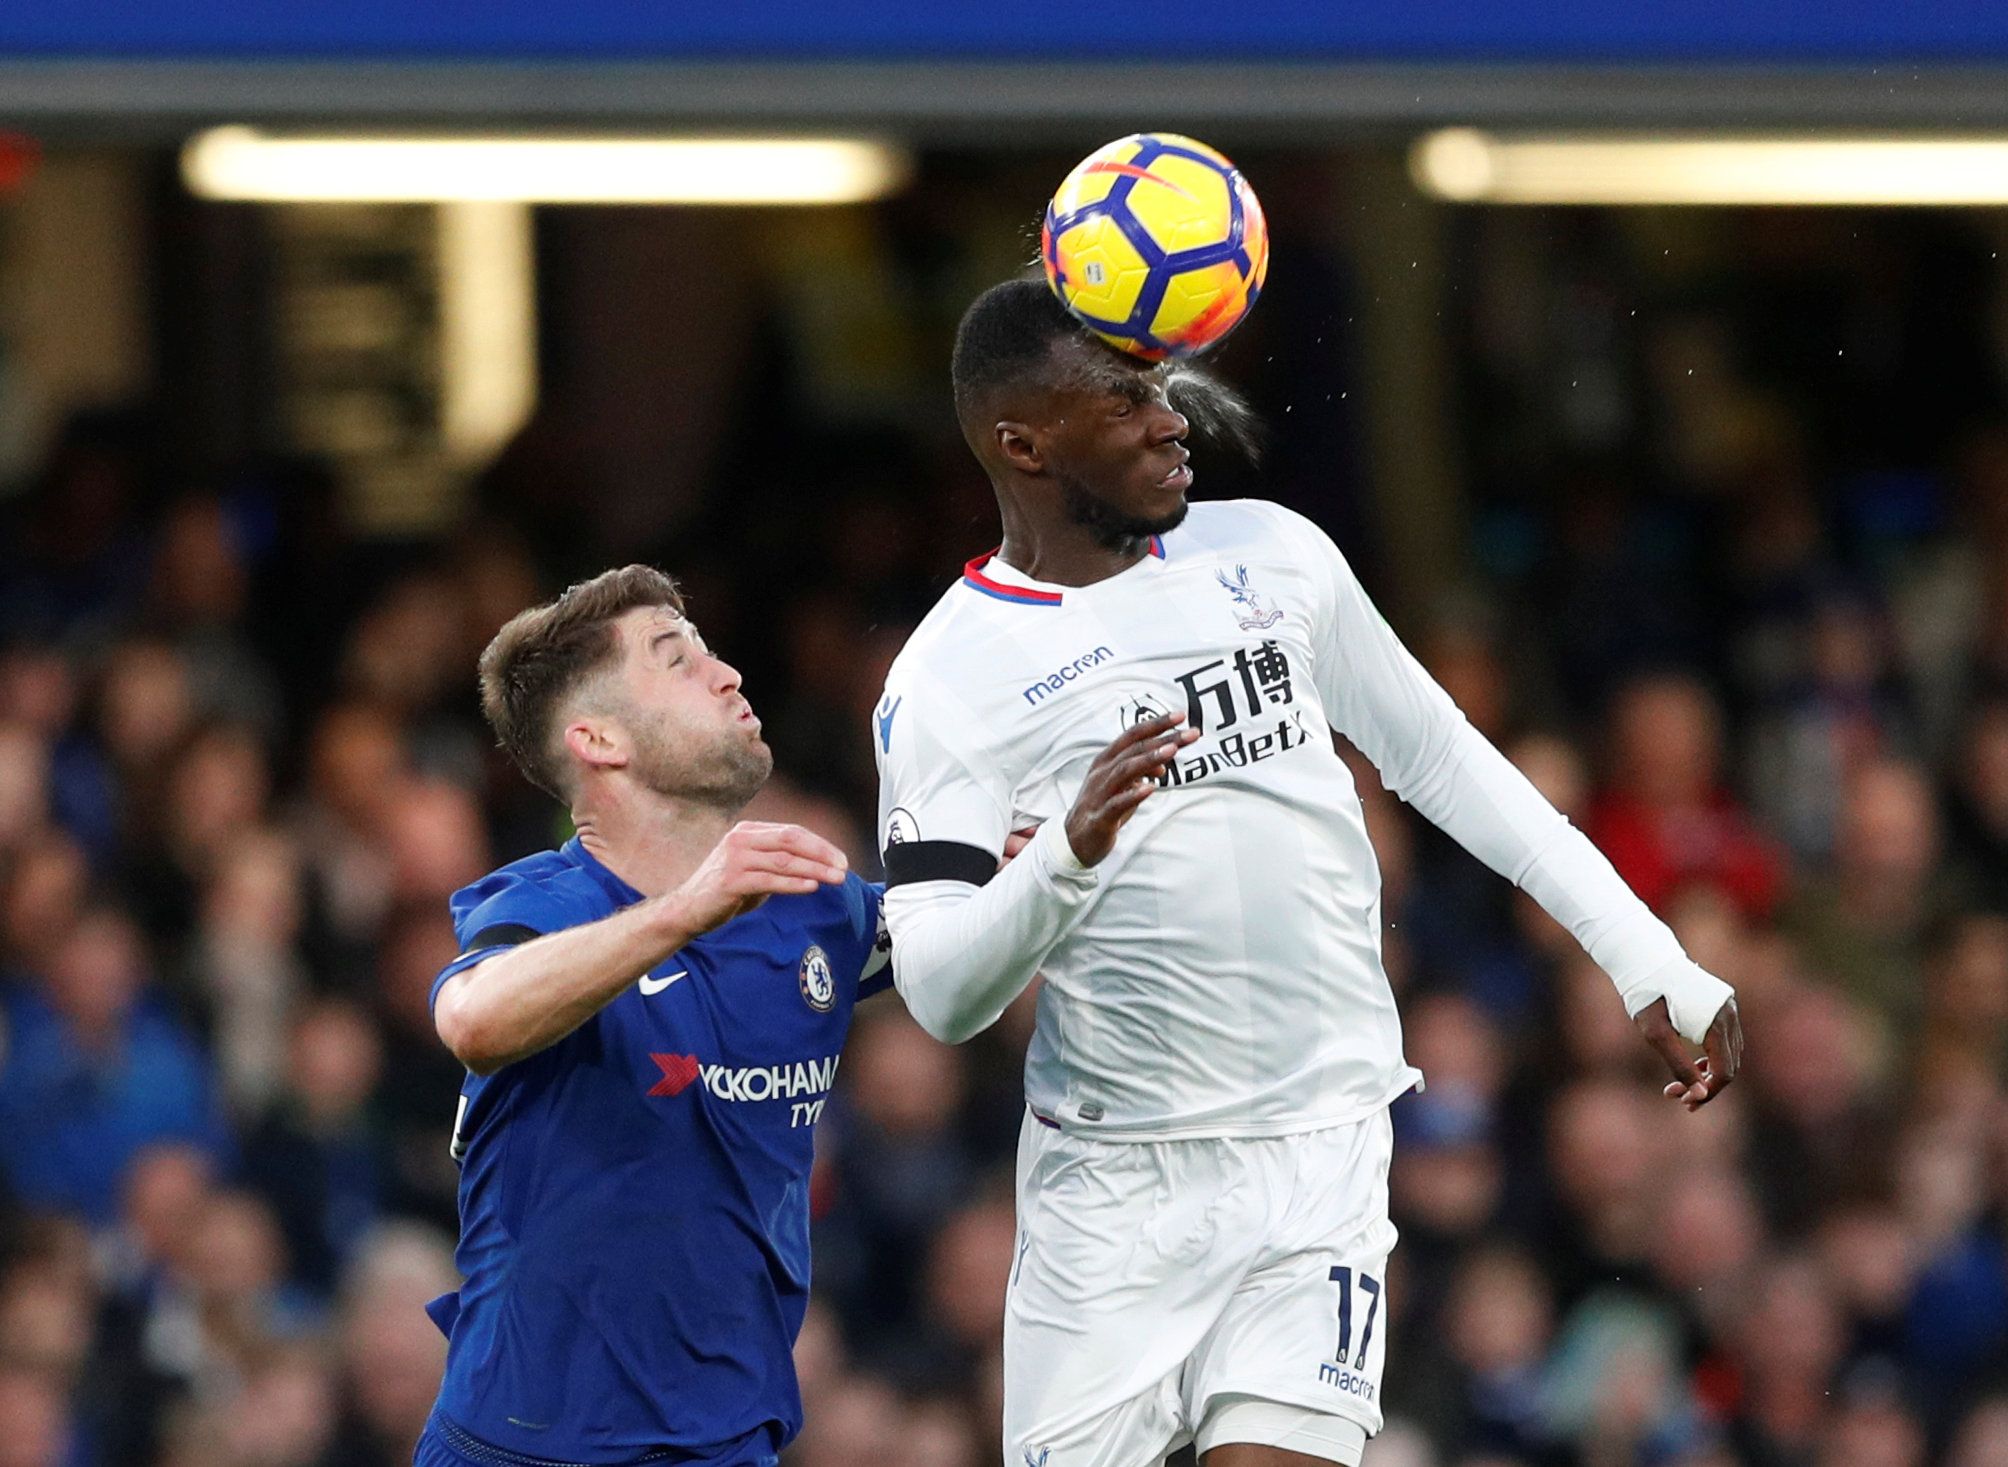 Soccer Football - Premier League - Chelsea vs Crystal Palace - Stamford Bridge, London, Britain - March 10, 2018   Crystal Palace's Christian Benteke in action with Chelsea's Gary Cahill    Action Images via Reuters/John Sibley    EDITORIAL USE ONLY. No use with unauthorized audio, video, data, fixture lists, club/league logos or 